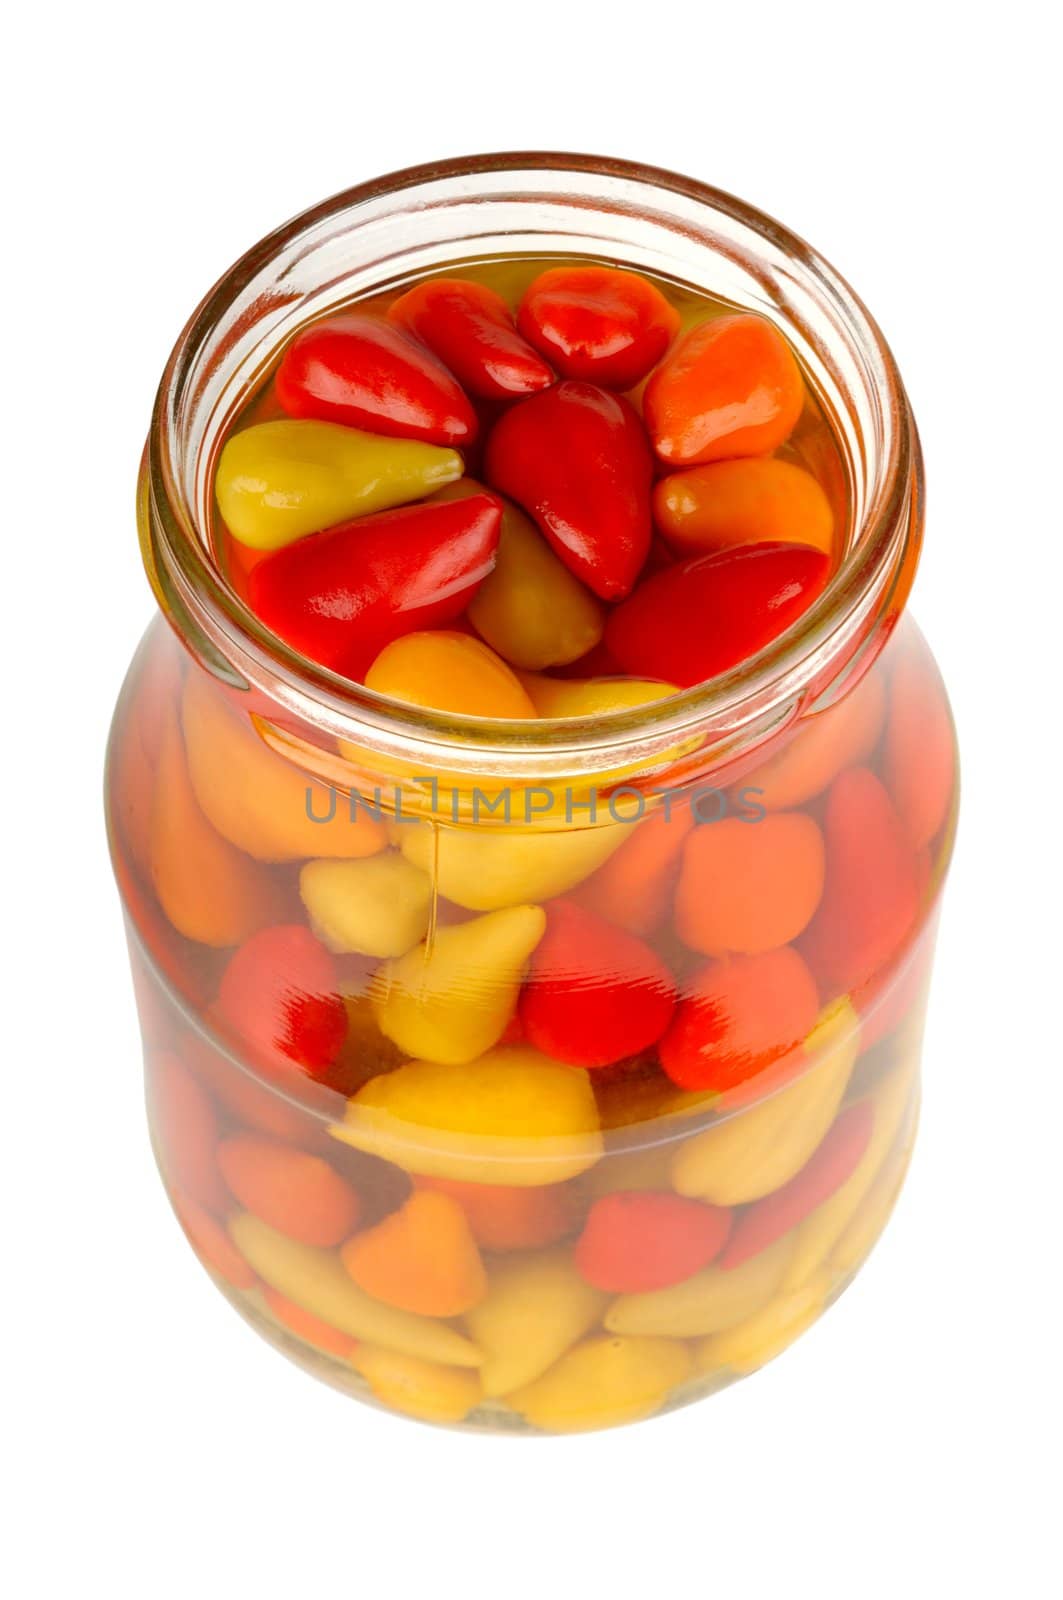 canned peppers in a glass jar isolated on white background